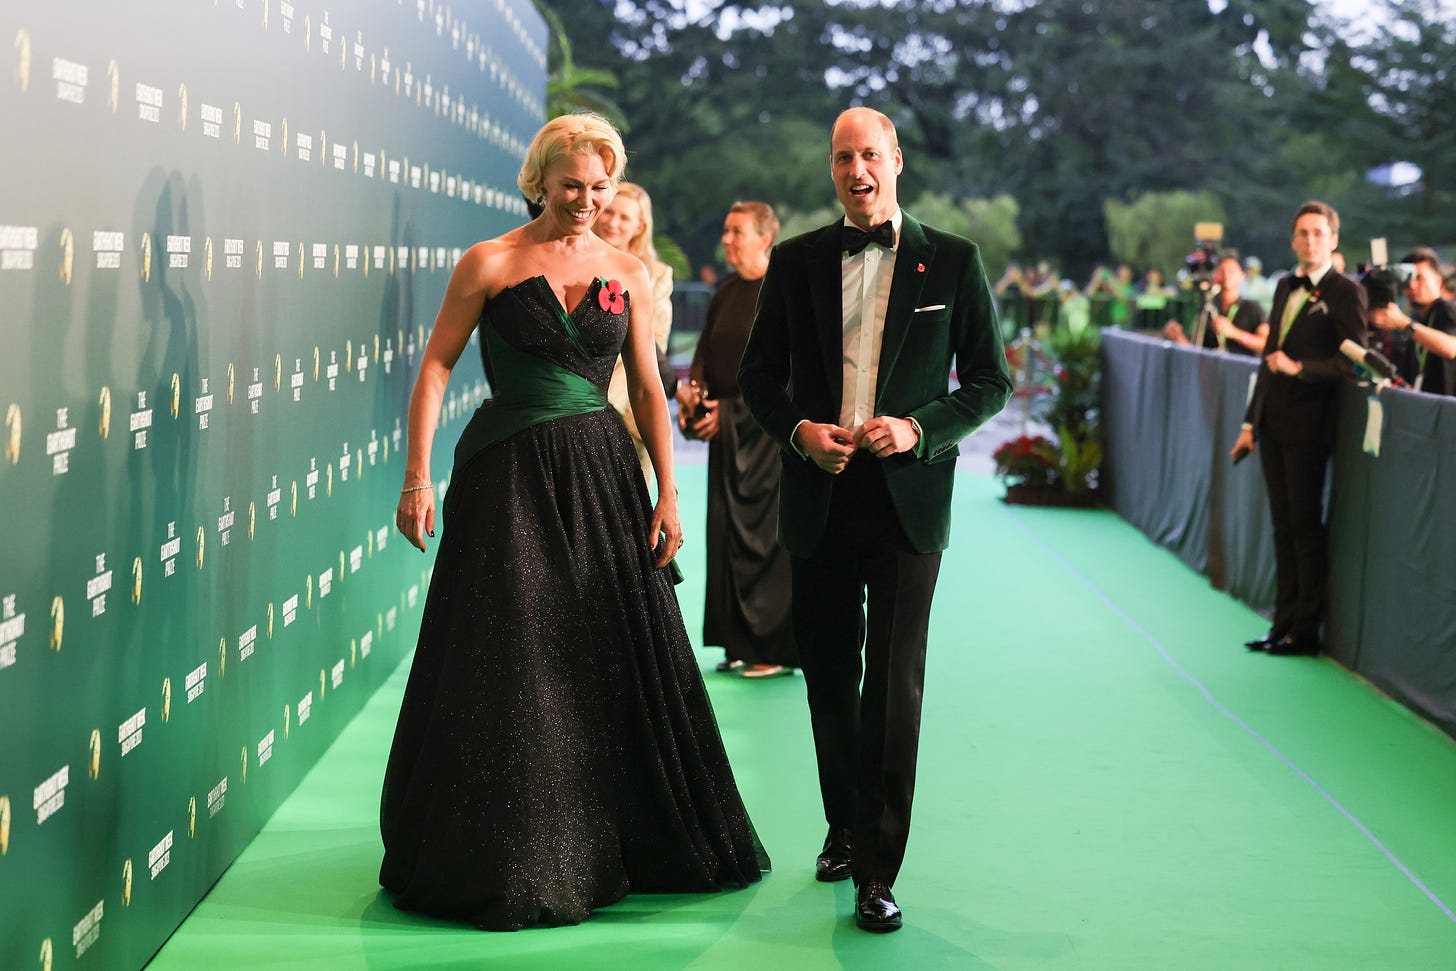 Prince William and Hanna Waddingham walking down the green carpet at Earthshot Awards